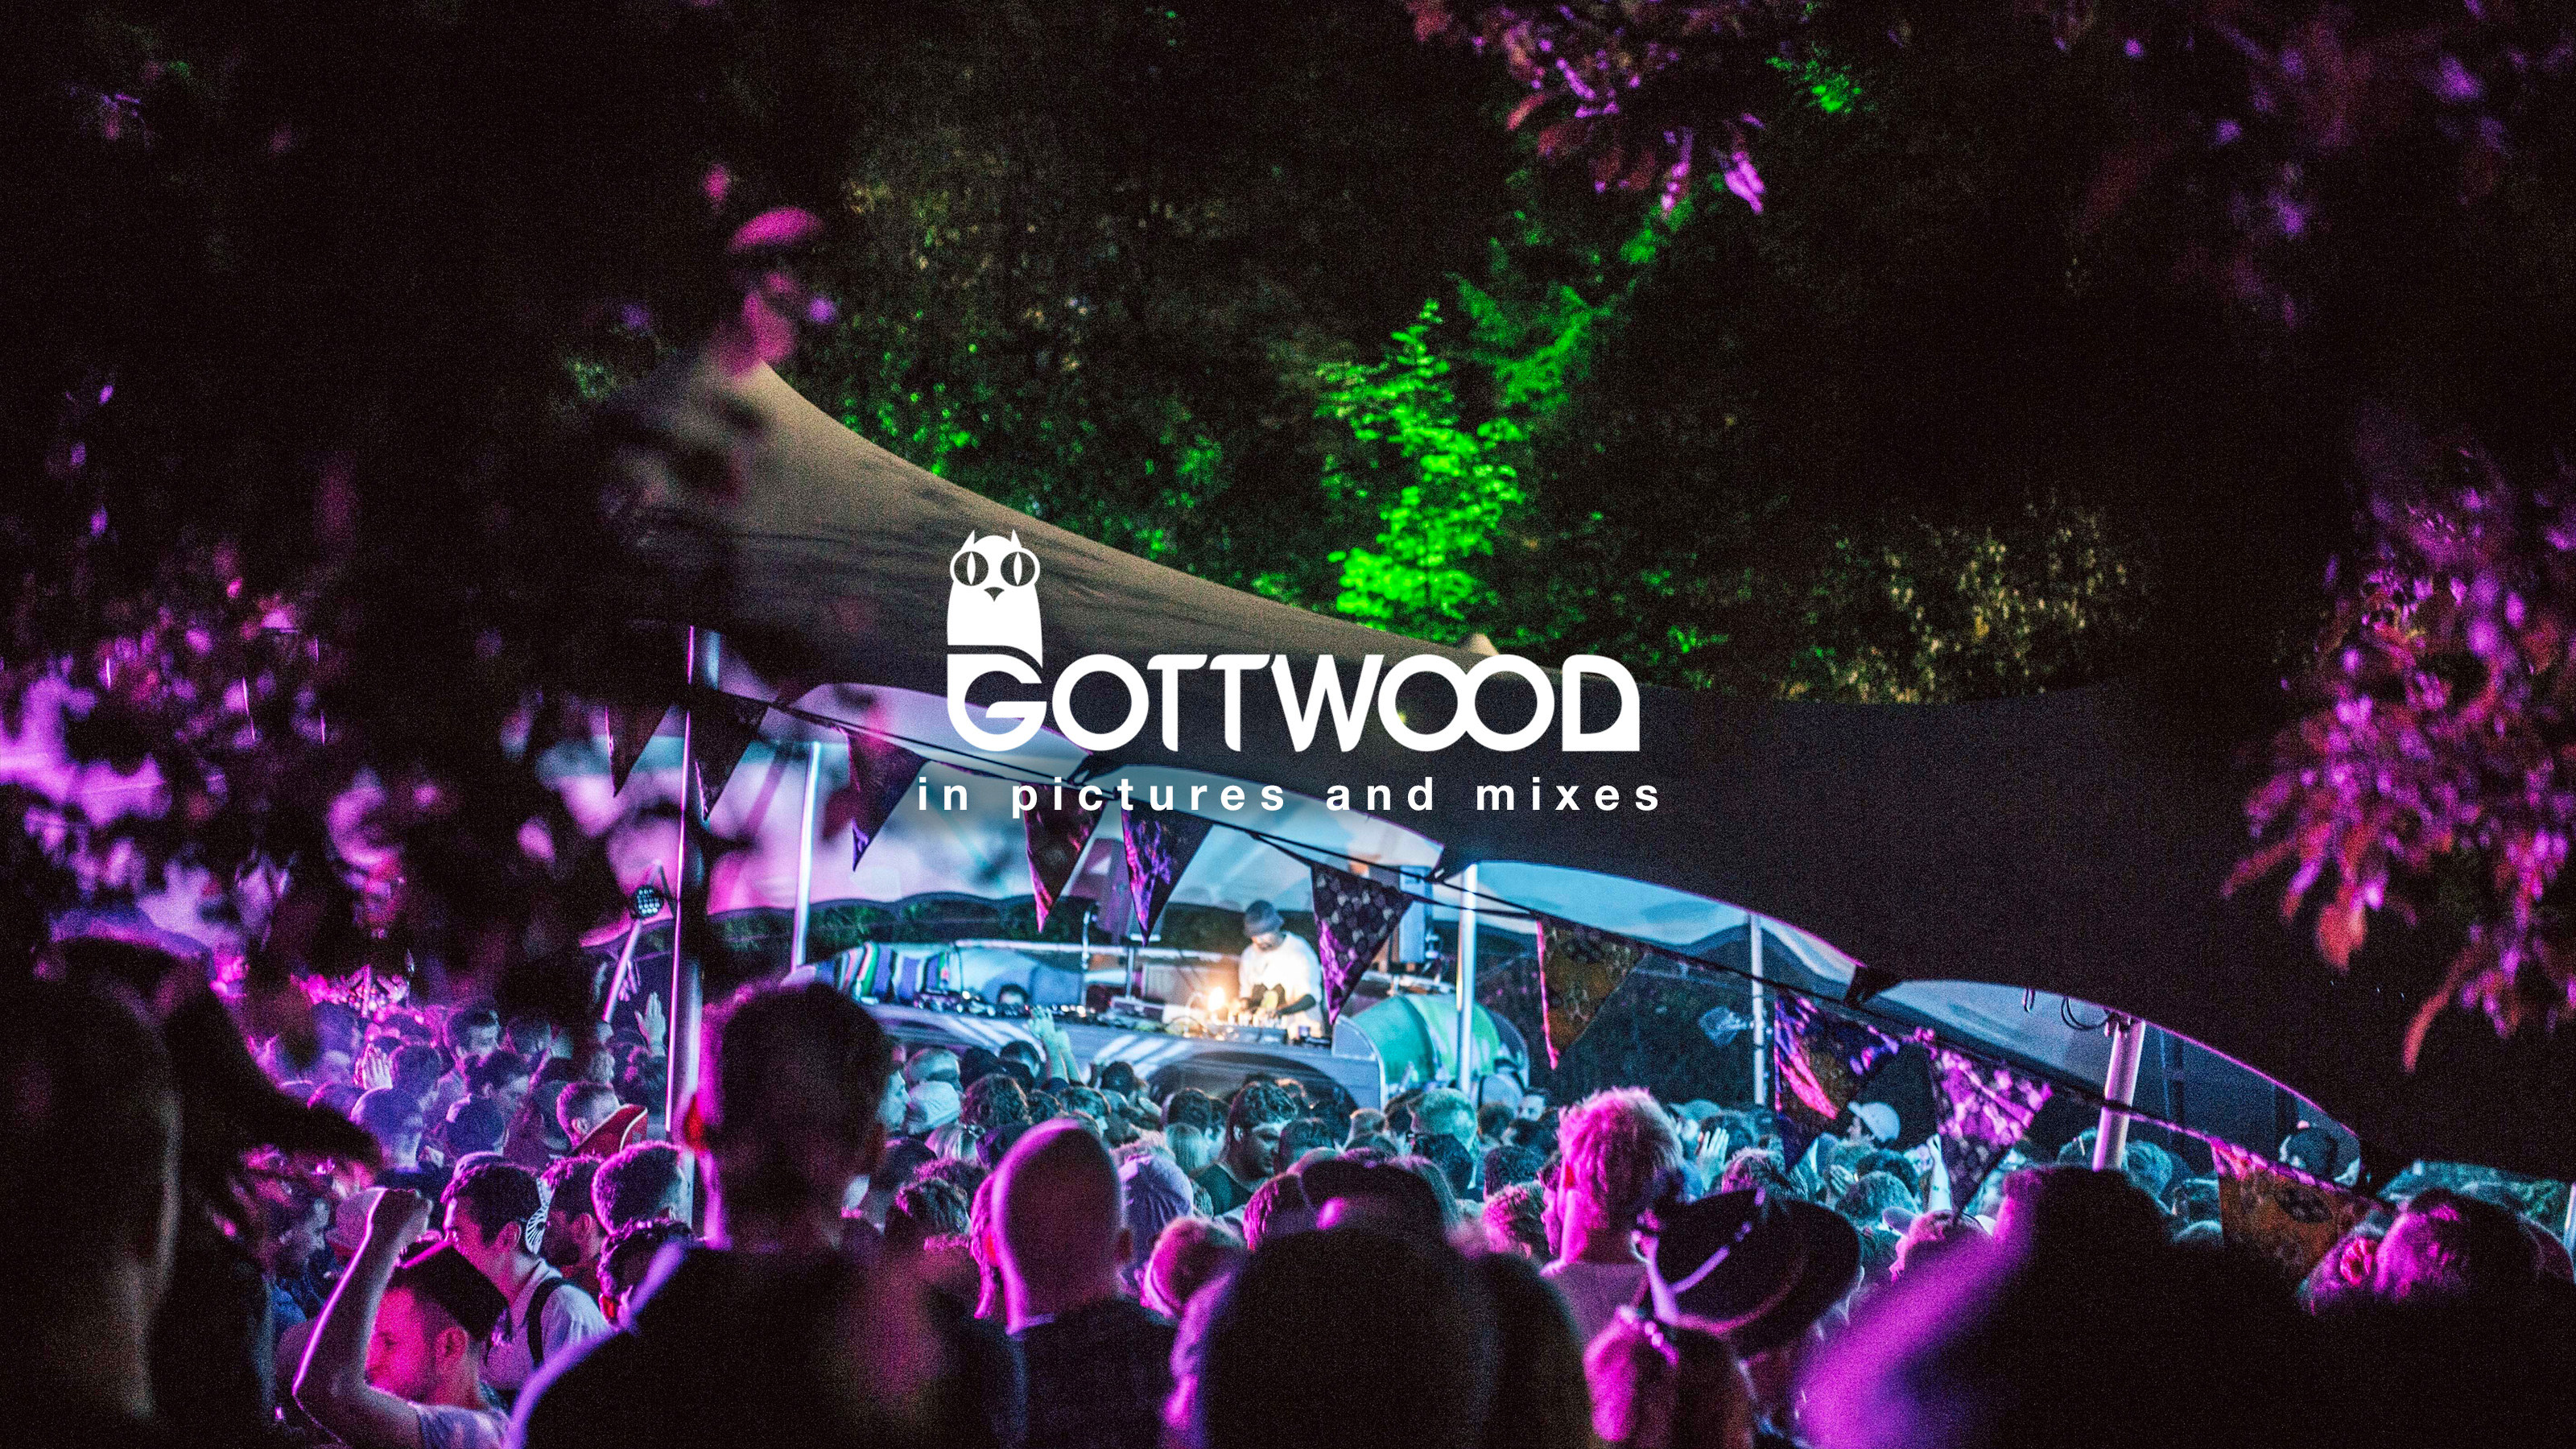 Gottwood Festival in pictures and mixes